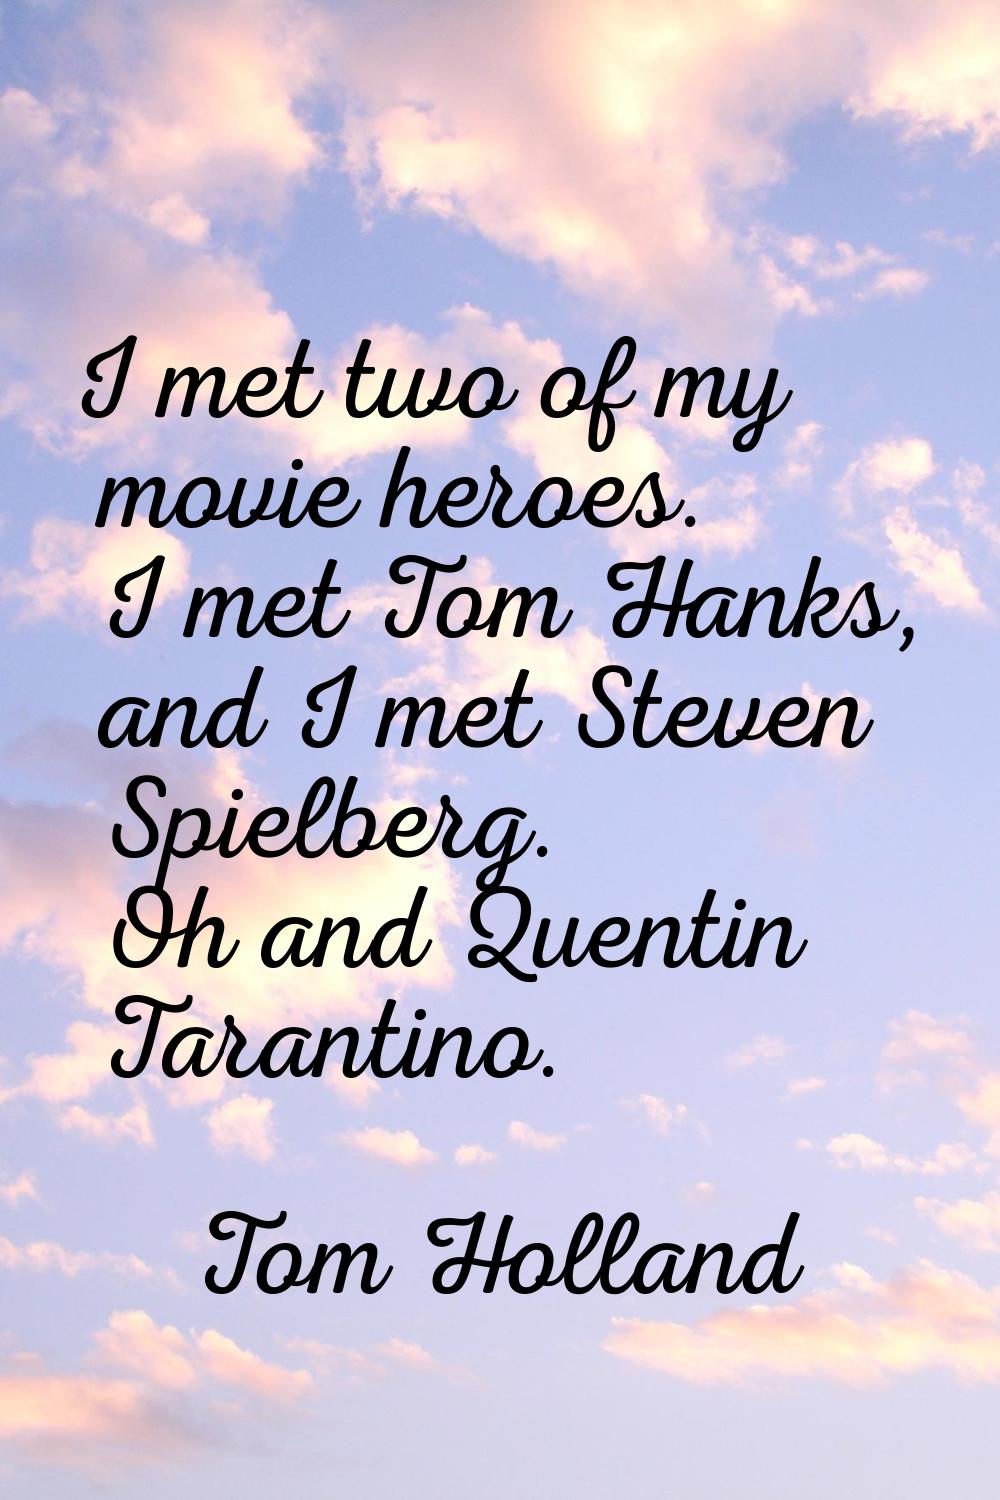 I met two of my movie heroes. I met Tom Hanks, and I met Steven Spielberg. Oh and Quentin Tarantino